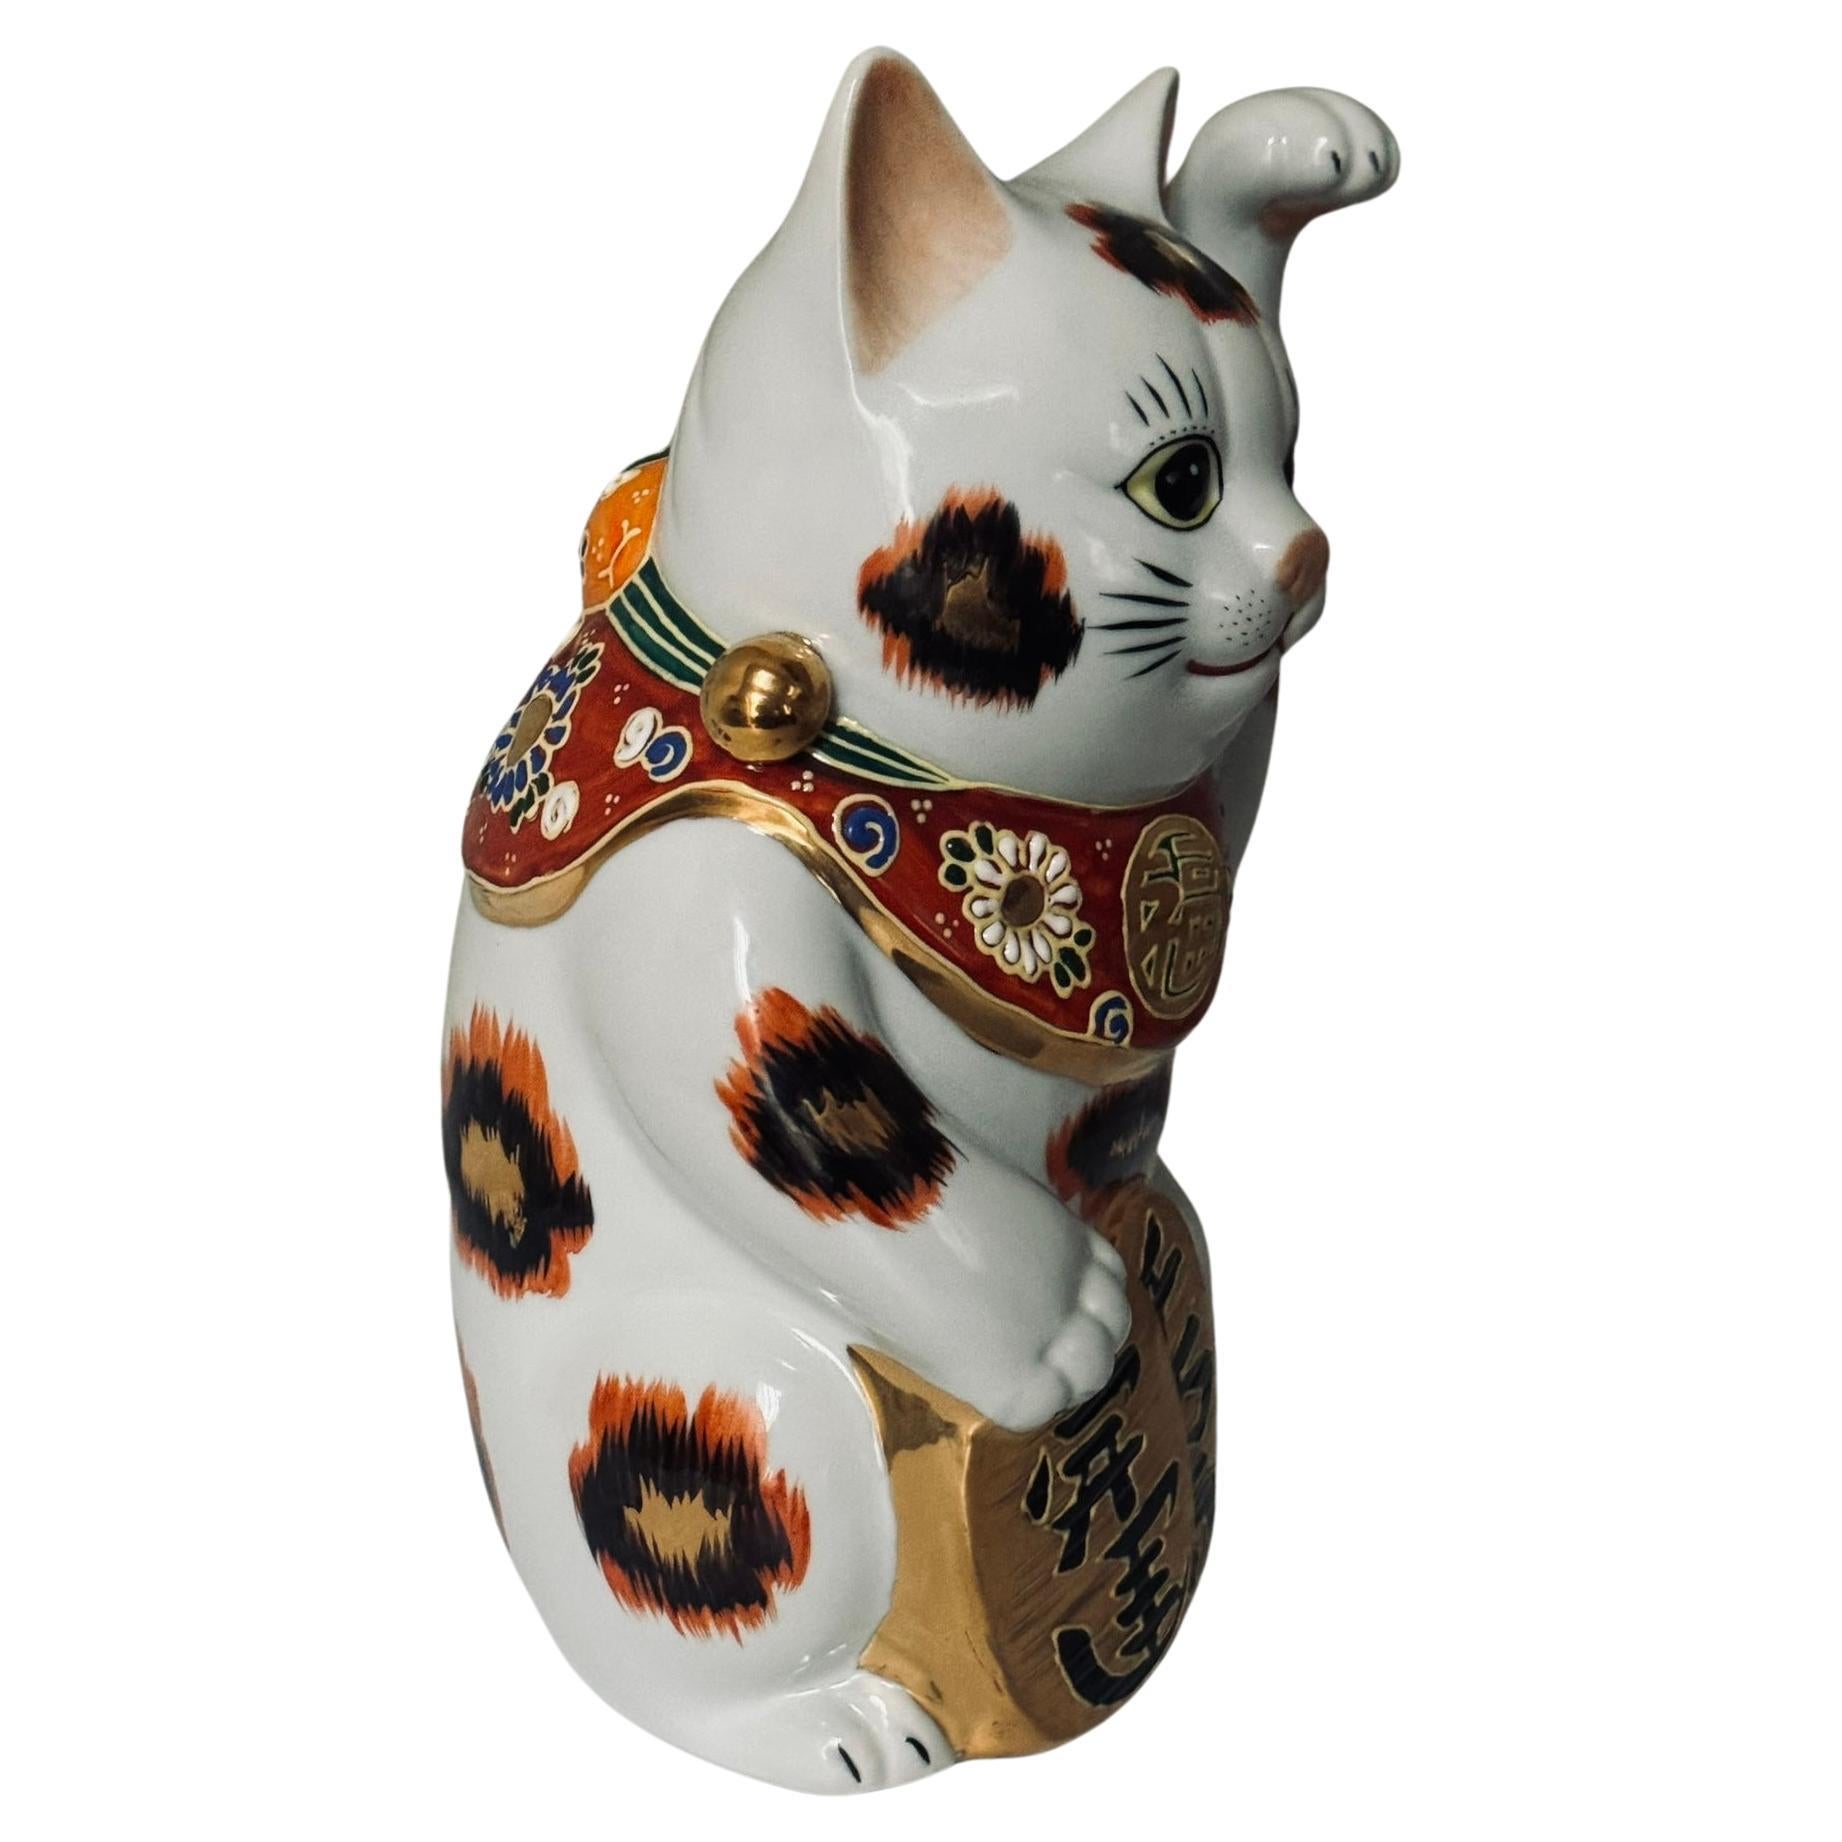 Charming beckoning cat with left paw raised is a gilded and hand painted porcelain piece from the Kutani region of Japan.
The beckoning cat comes in two varieties. The more common right-handed beckoning cat (with right paw raised) is said to bring